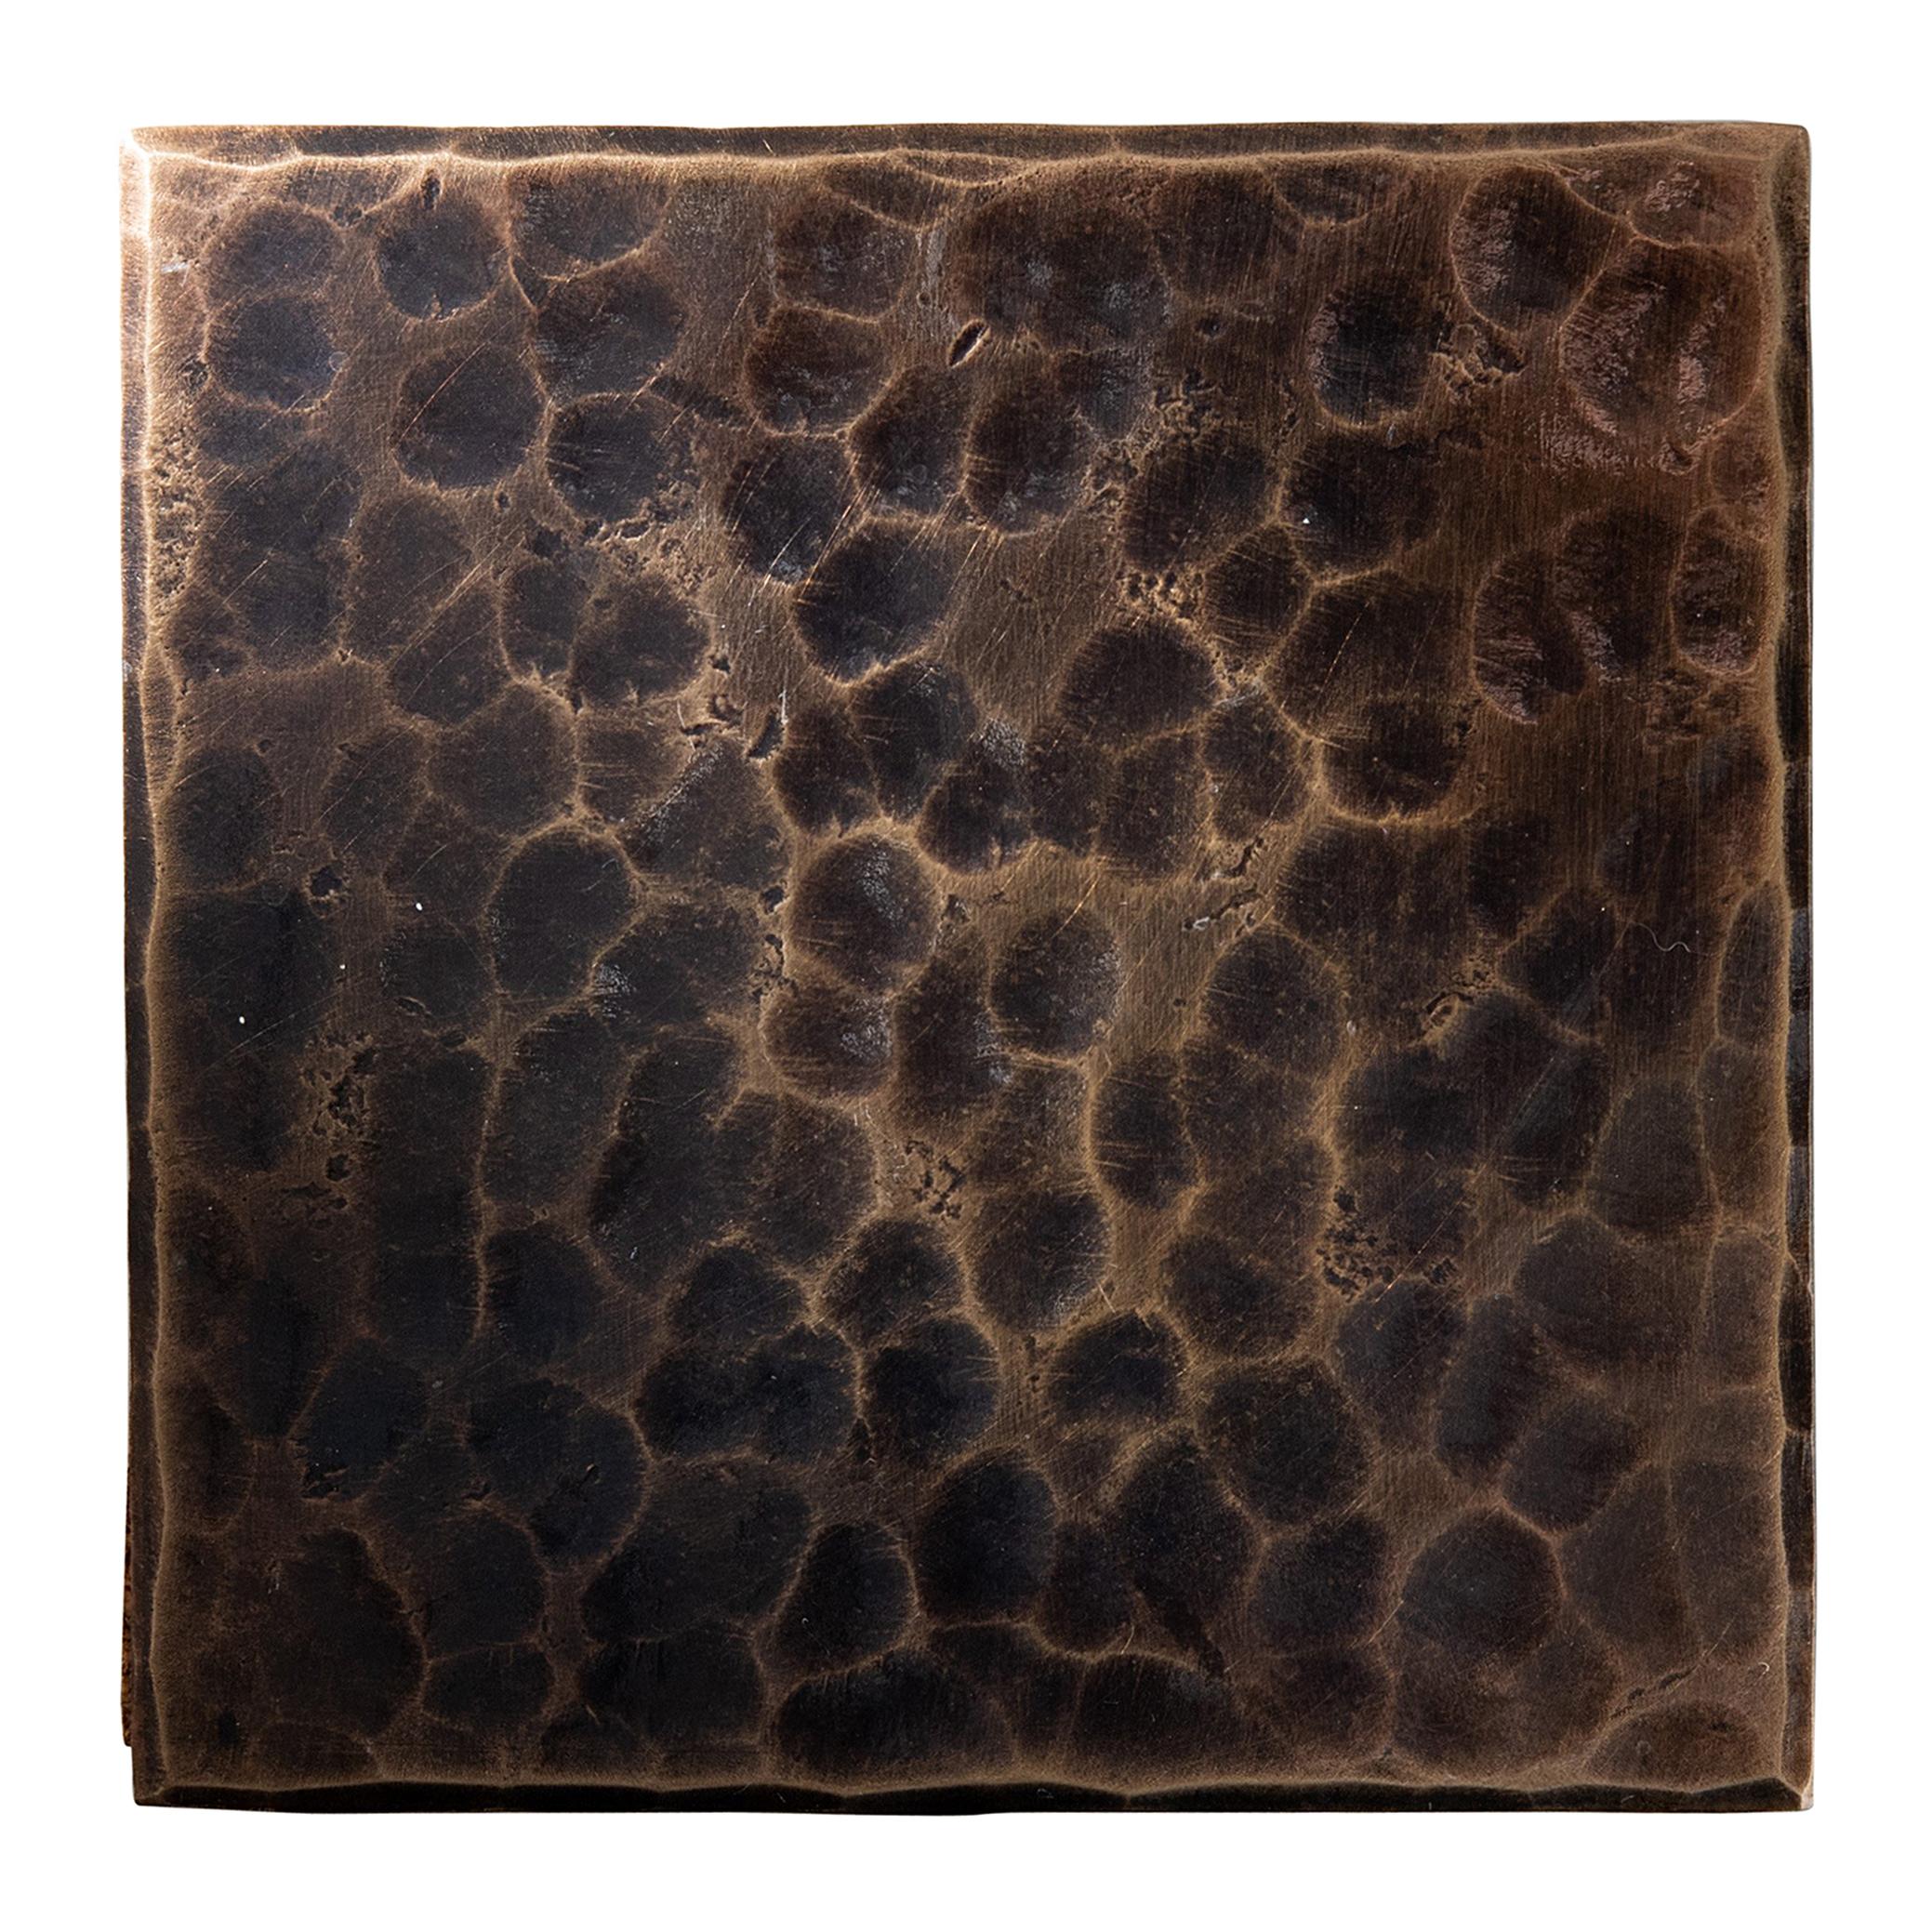 Forged Bronze Square Coaster with Decorative Planished Surface